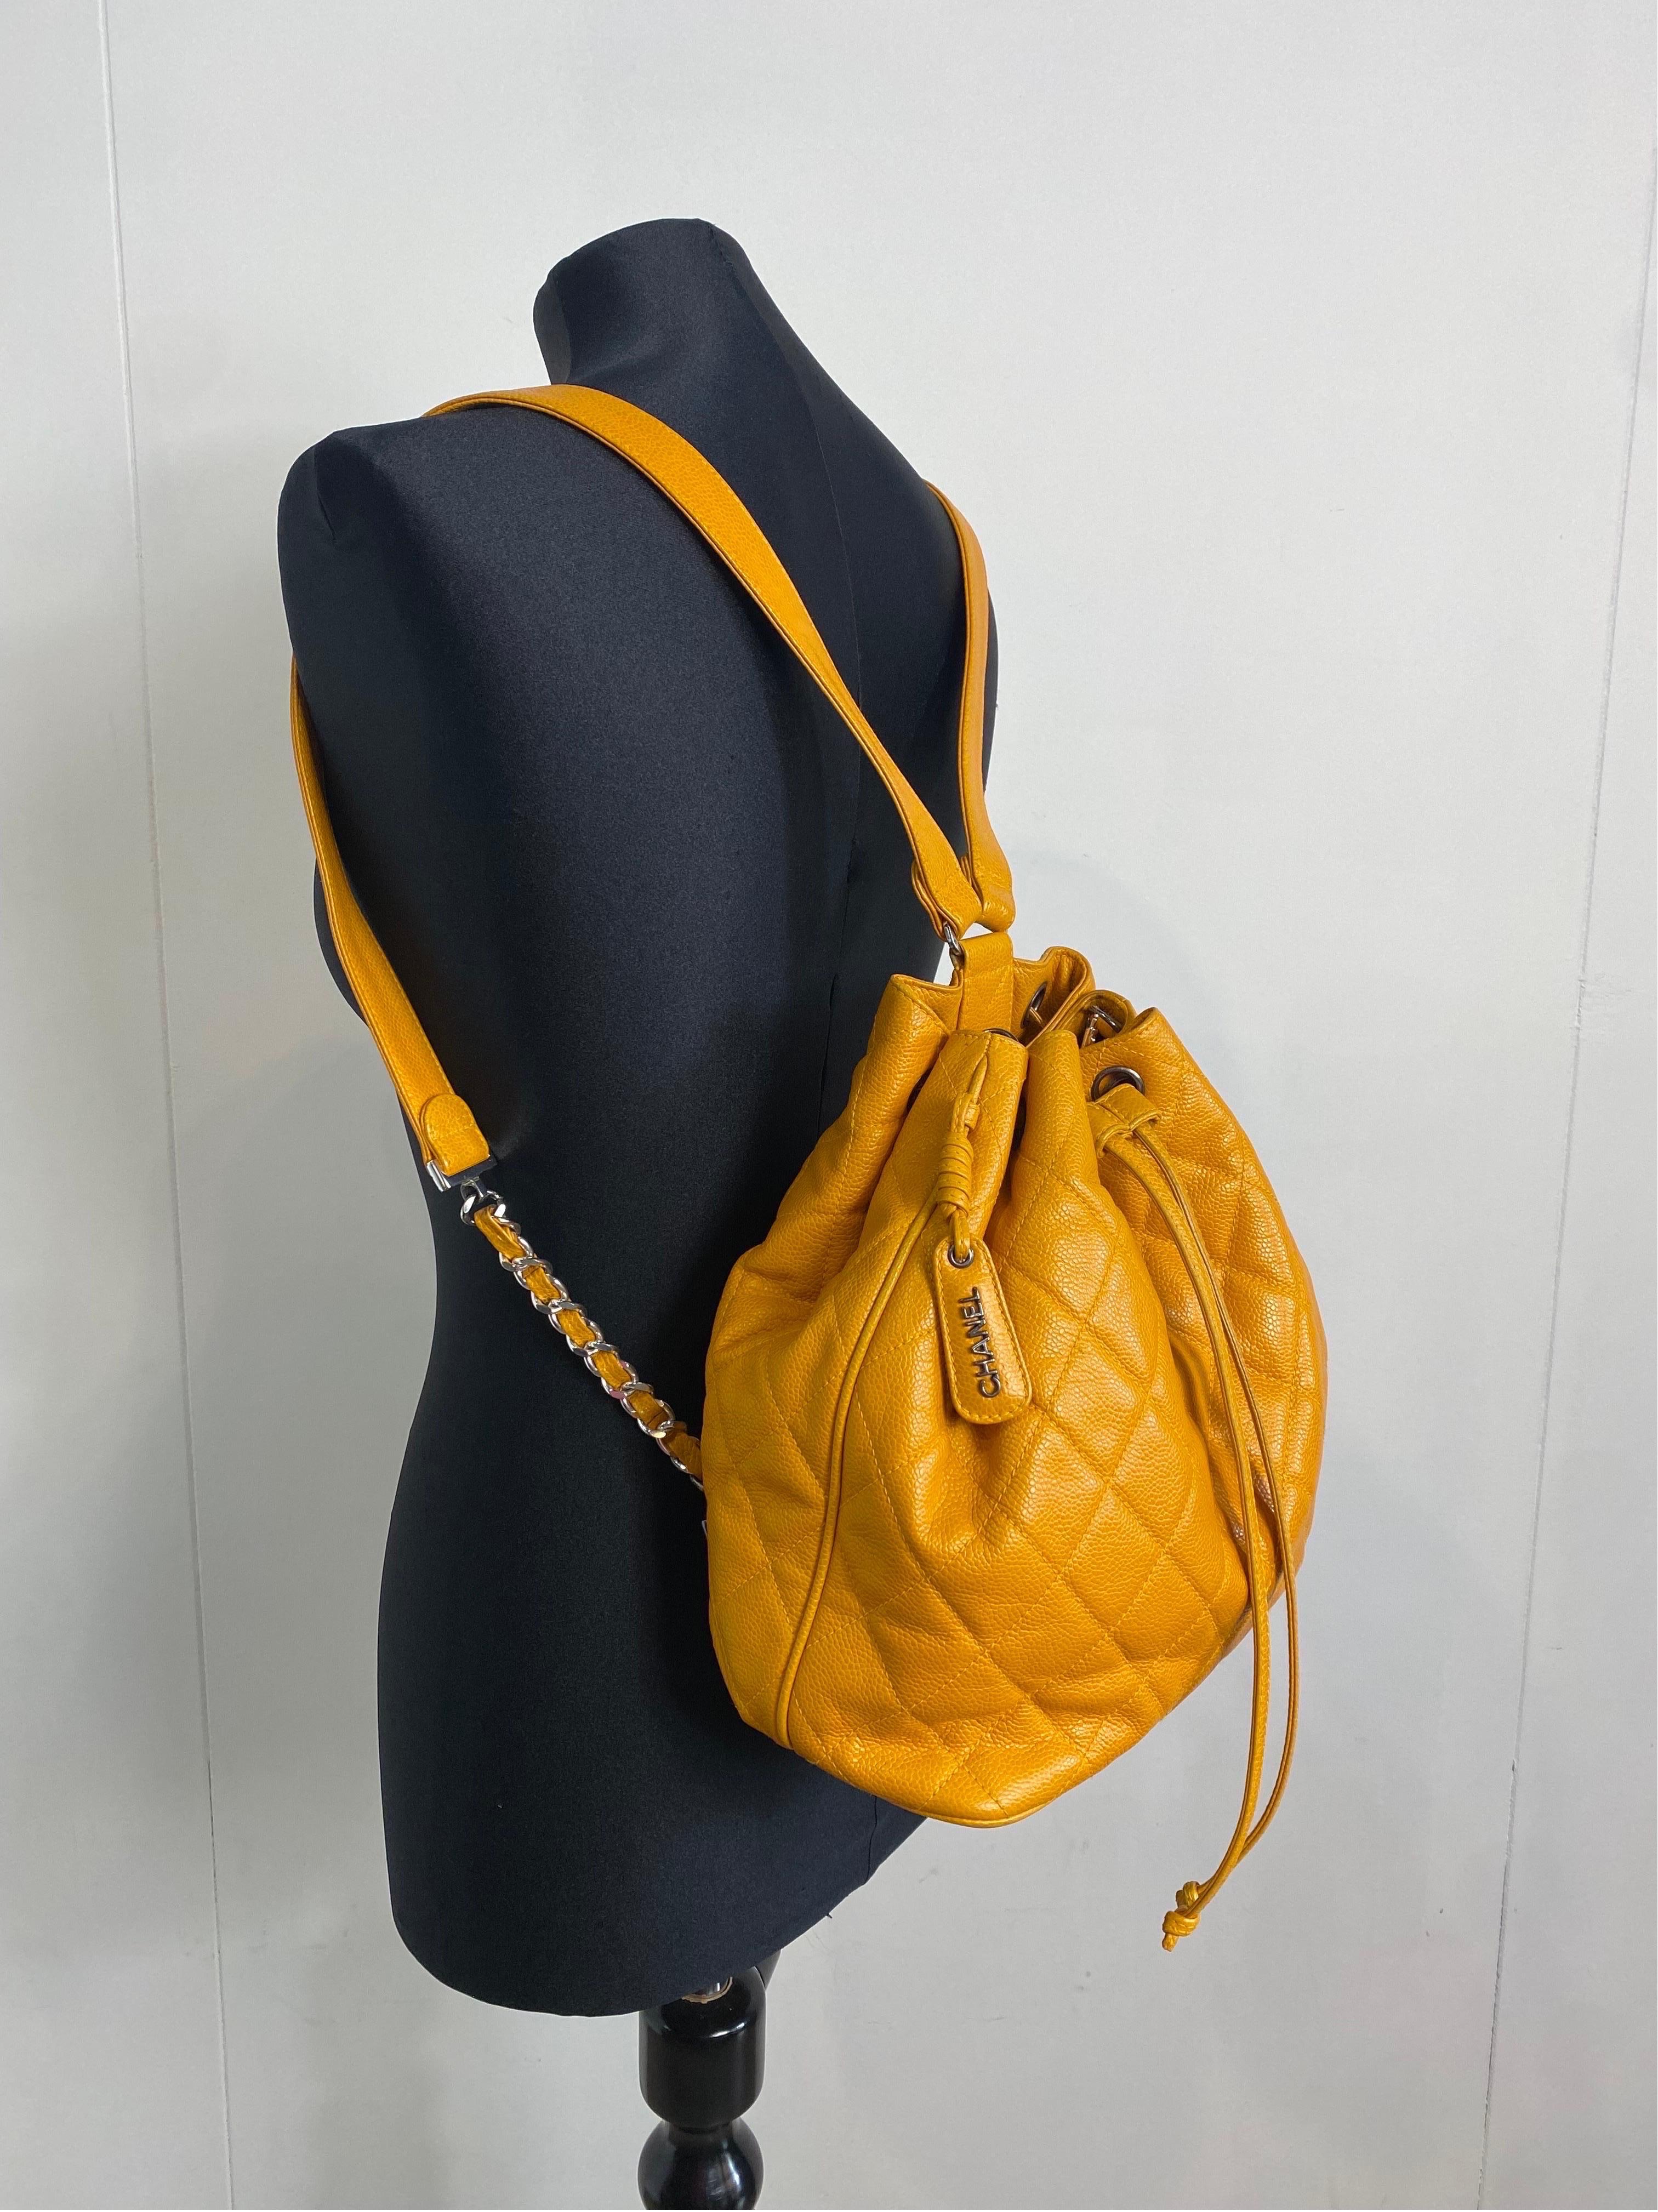 Vintage Chanel backpack.
In mustard-coloured quilted caviar leather. Silvered hardware but oxidized in several places as shown in the photo.
The interior is in fabric. Has a couple of stains as shown in the photo.
It has two internal pockets.
It can